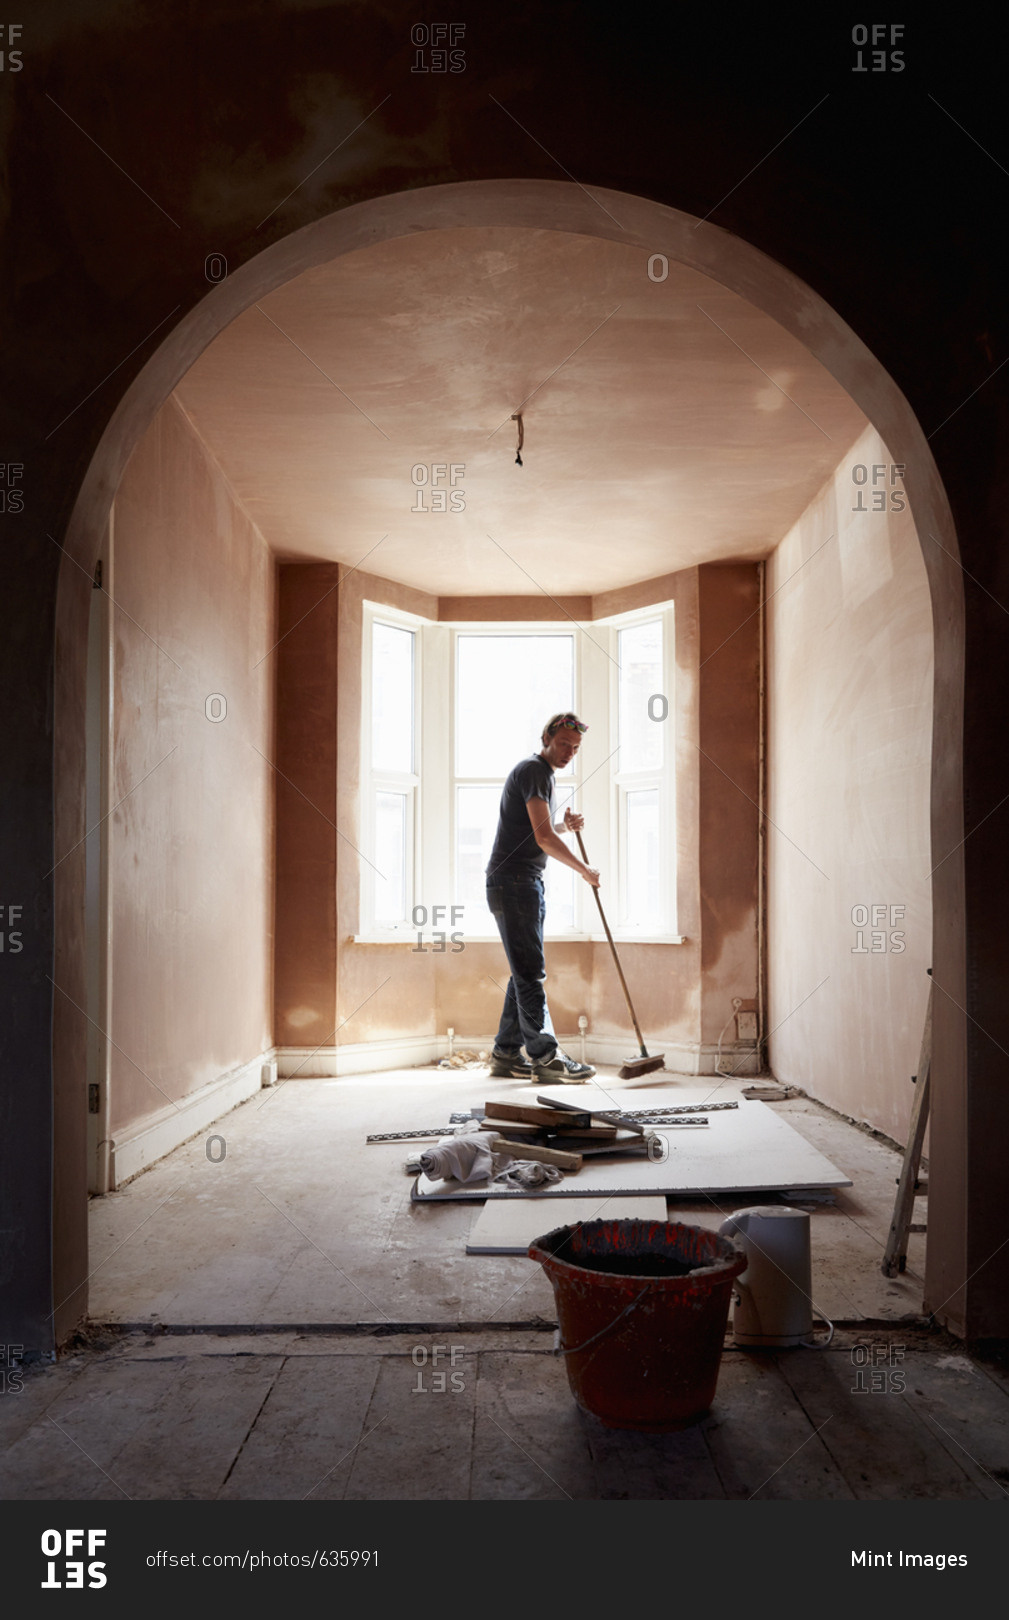 A builder sweeping and tidying up in a renovated replastered house with an archway.